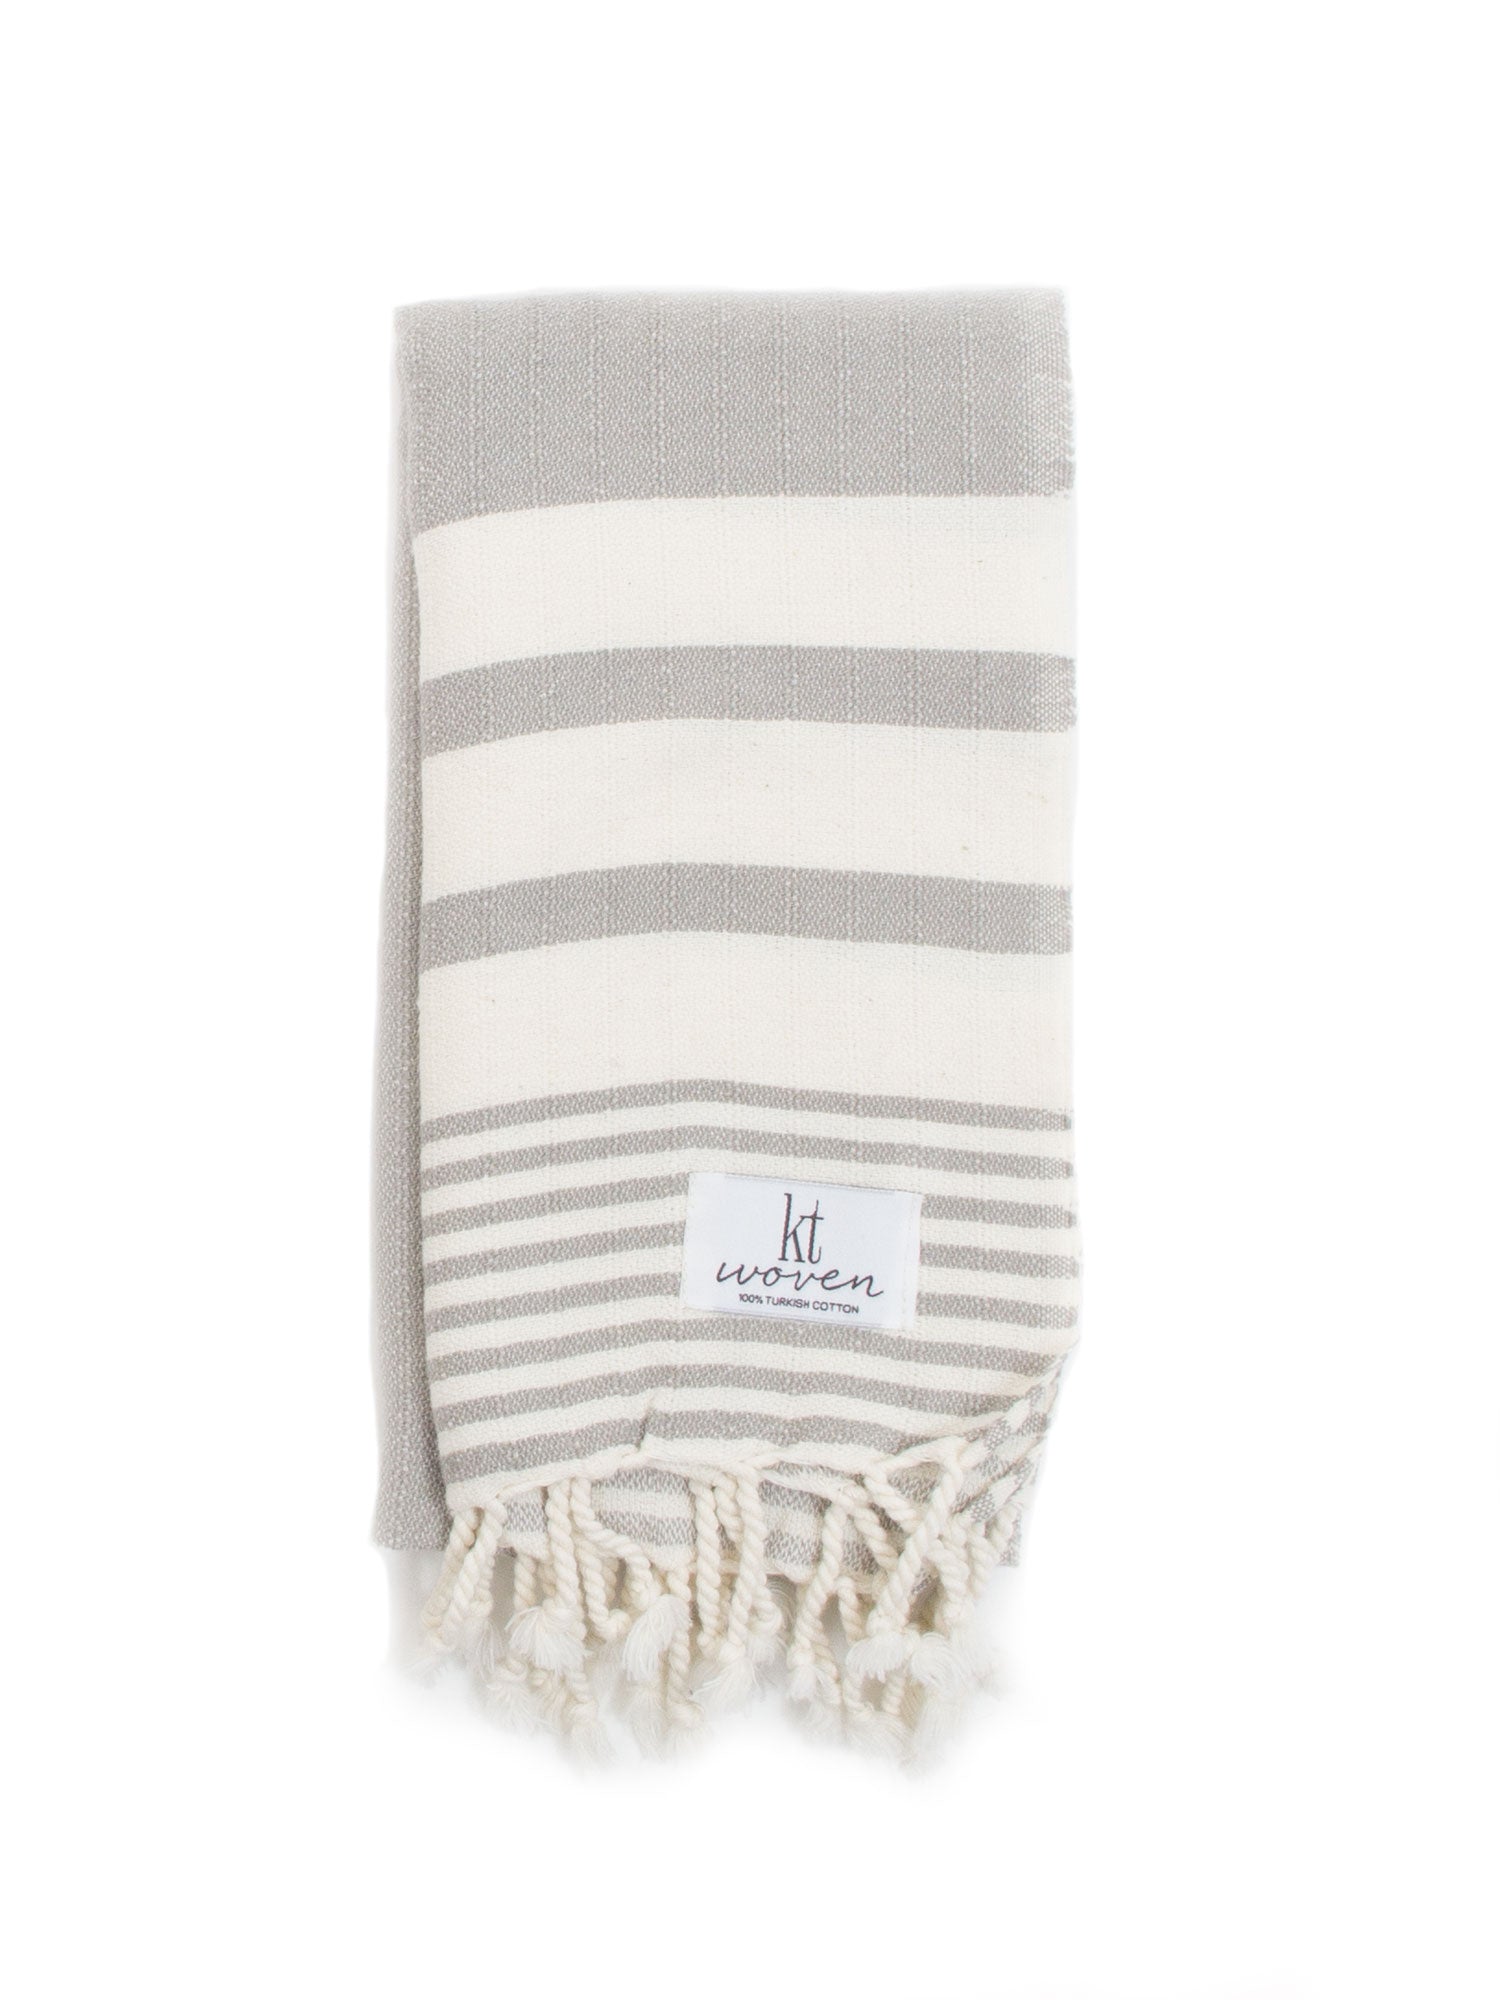 All the Stripes Hand Towel